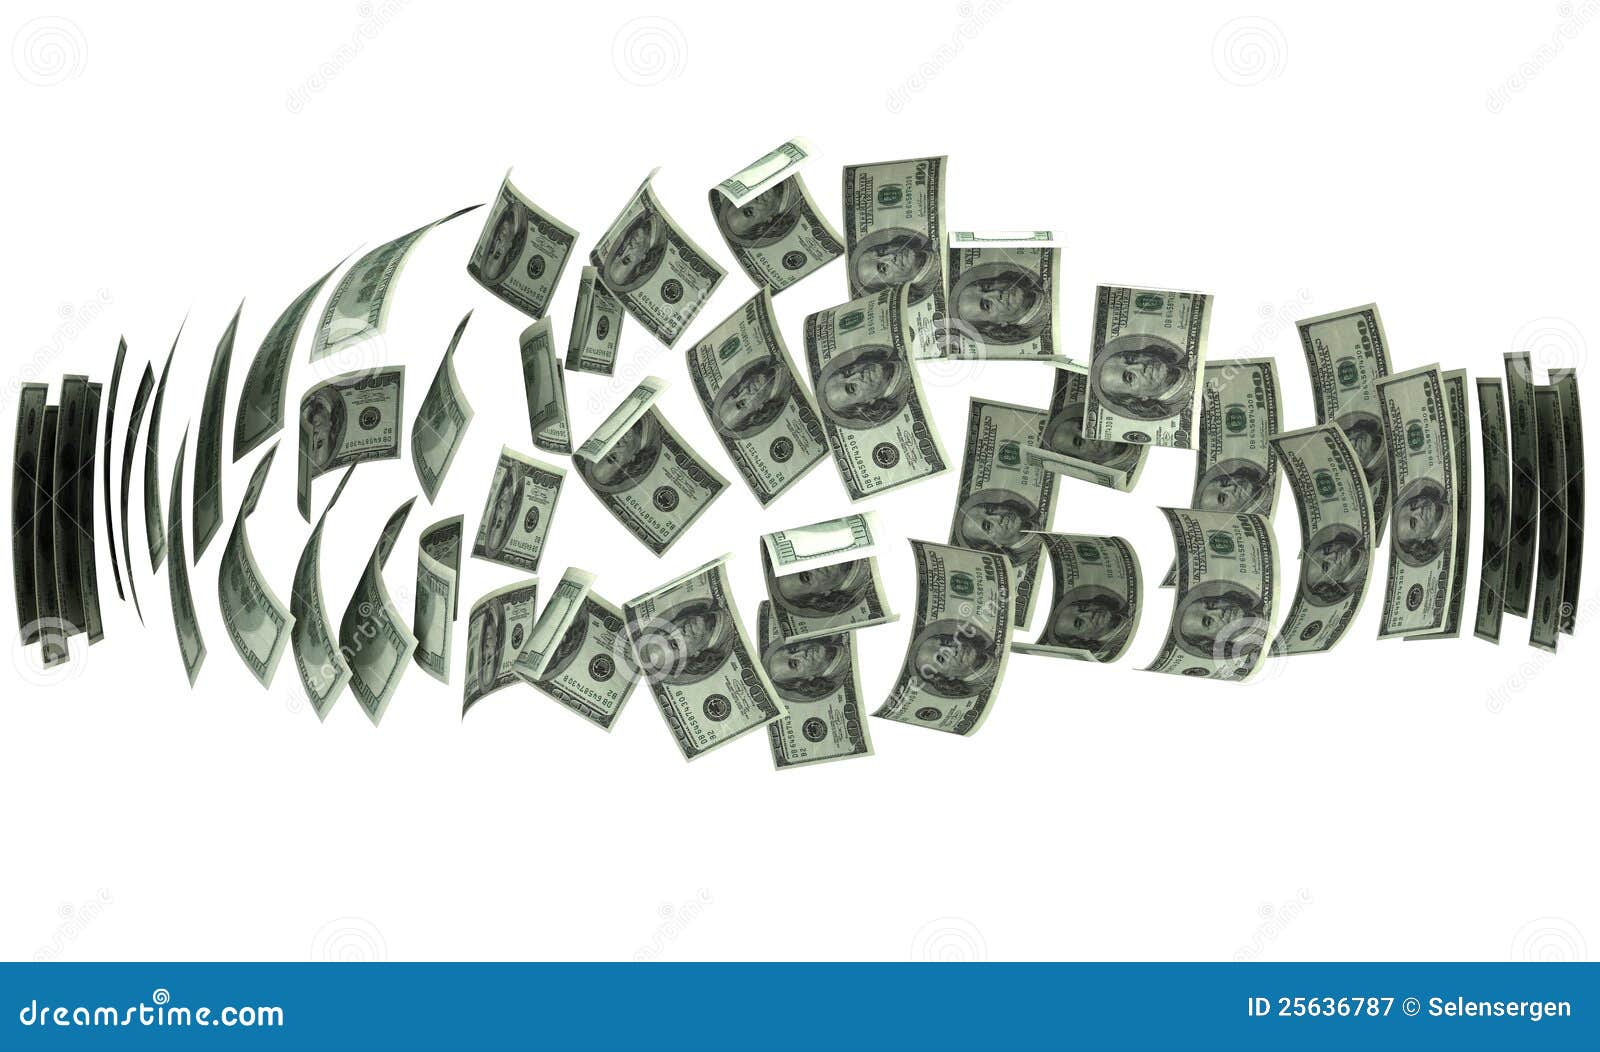 moving money clipart - photo #24